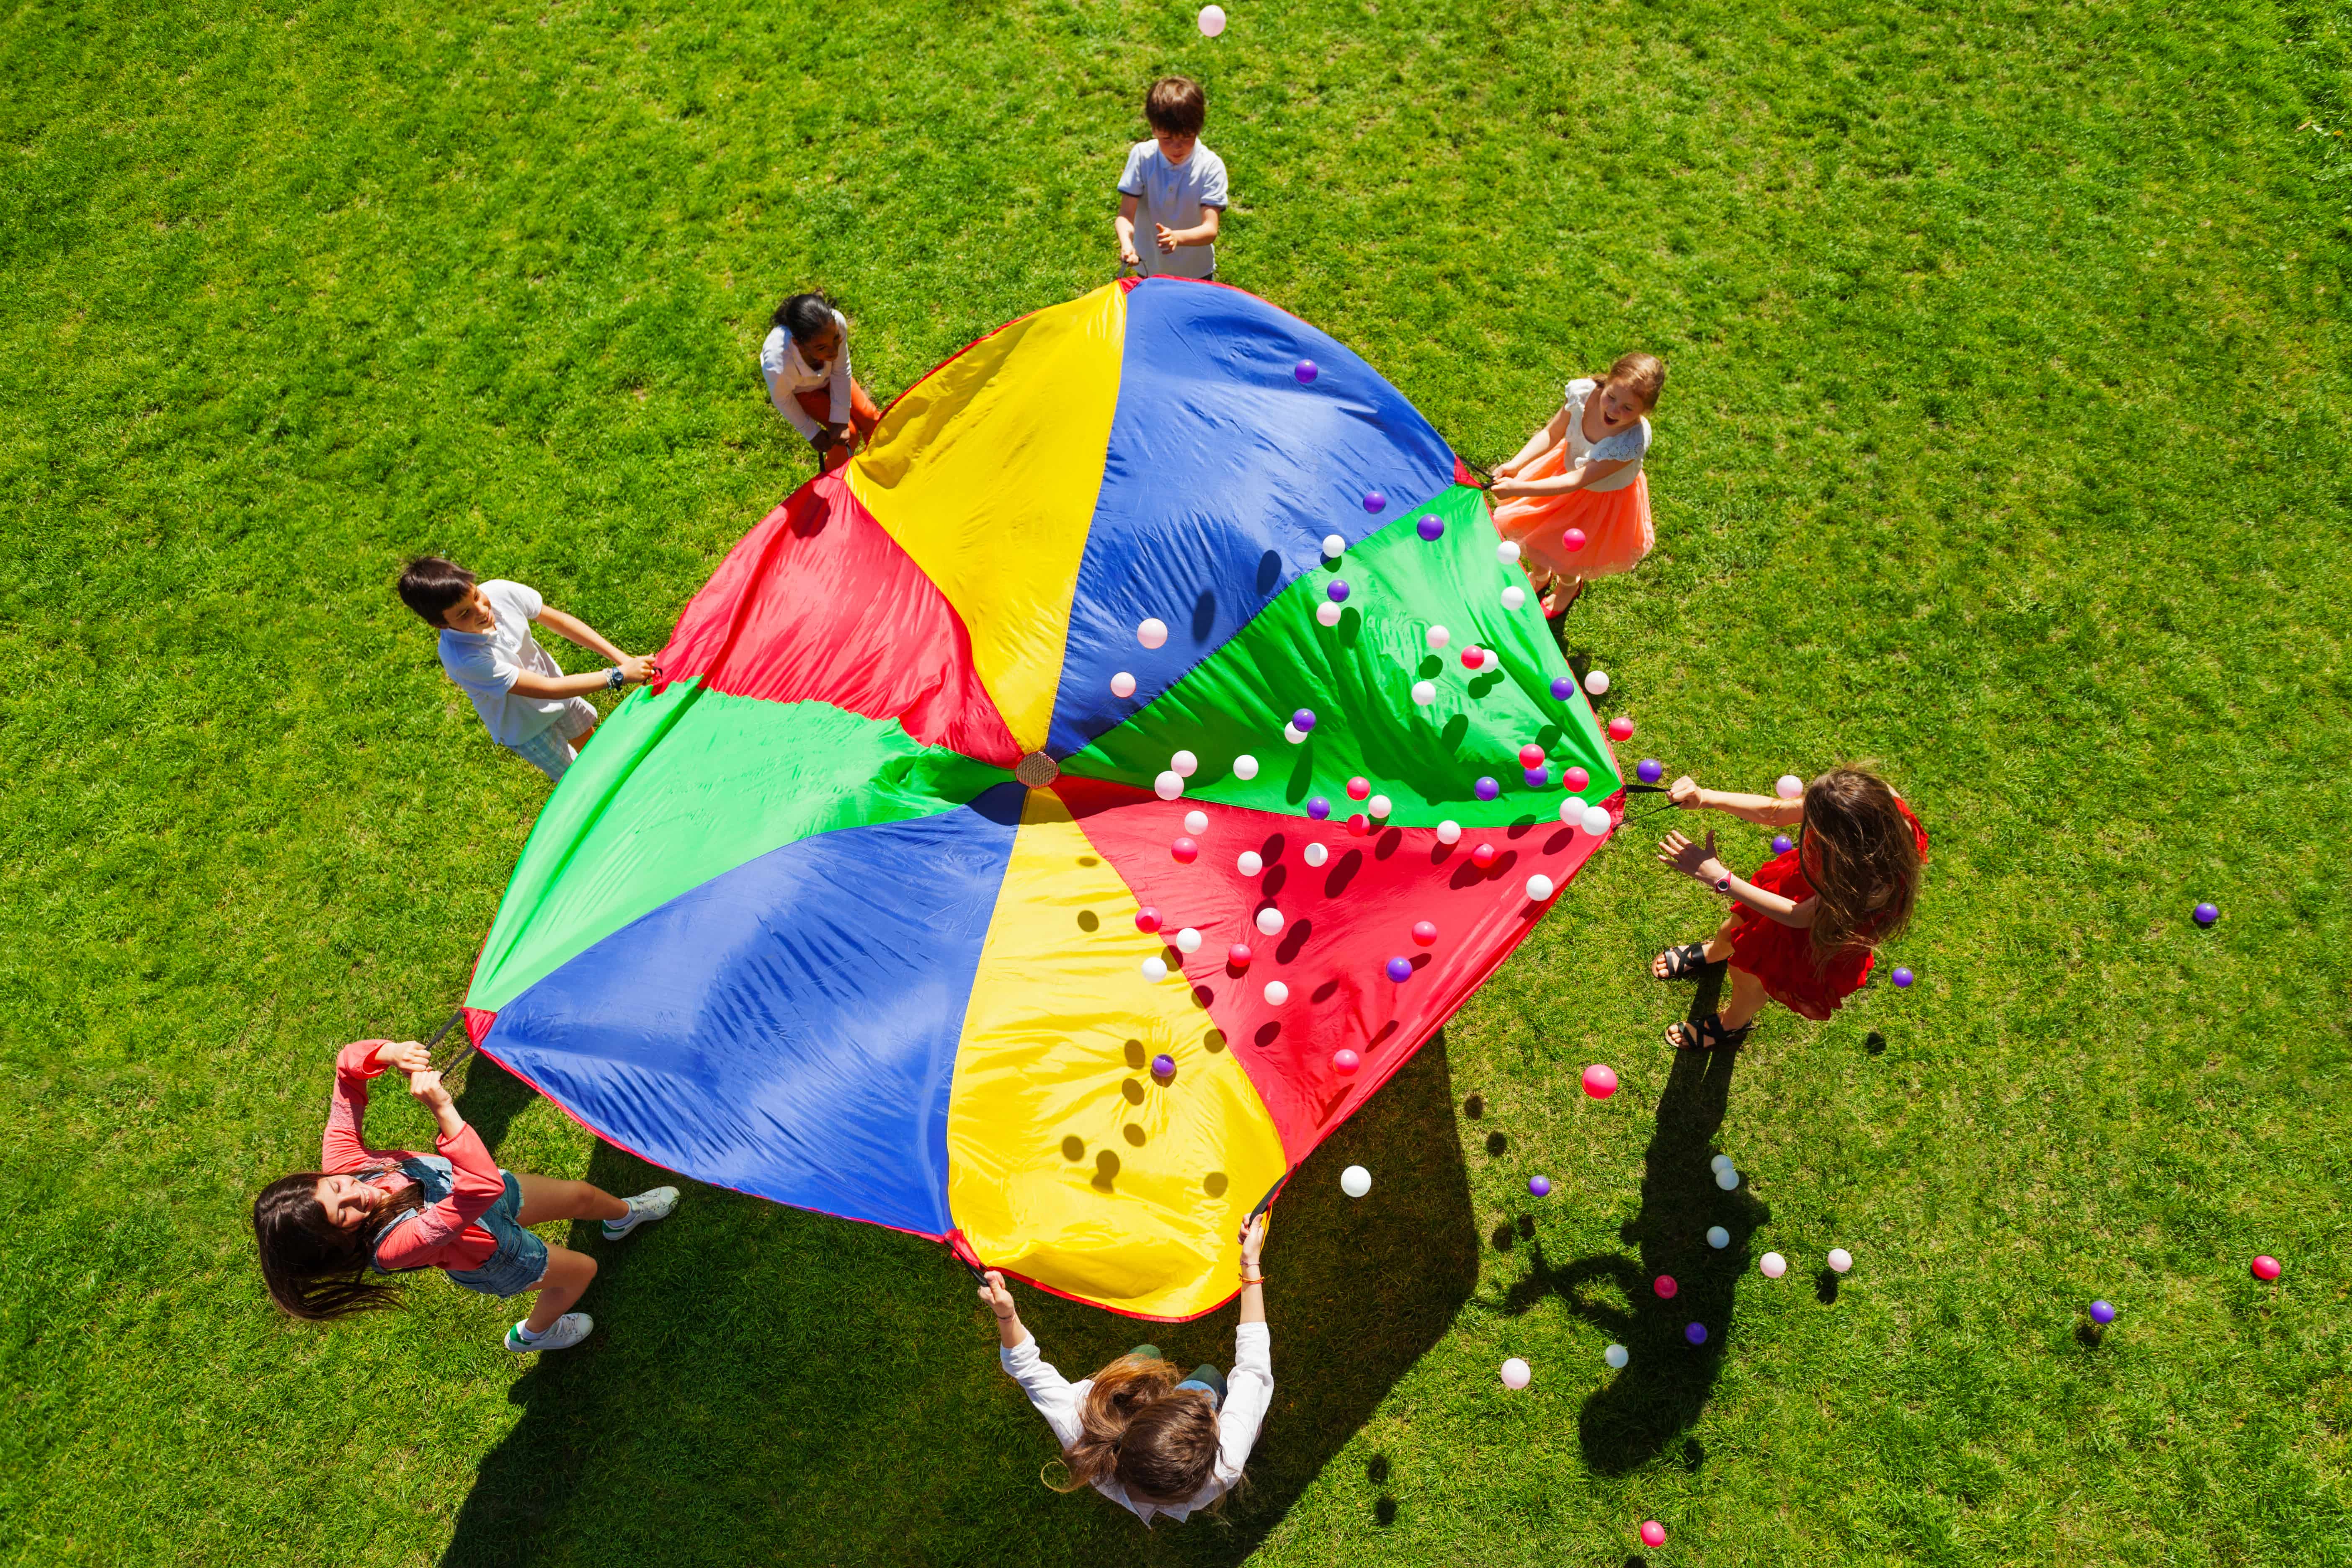 Kids Playing In Grass With Parachute